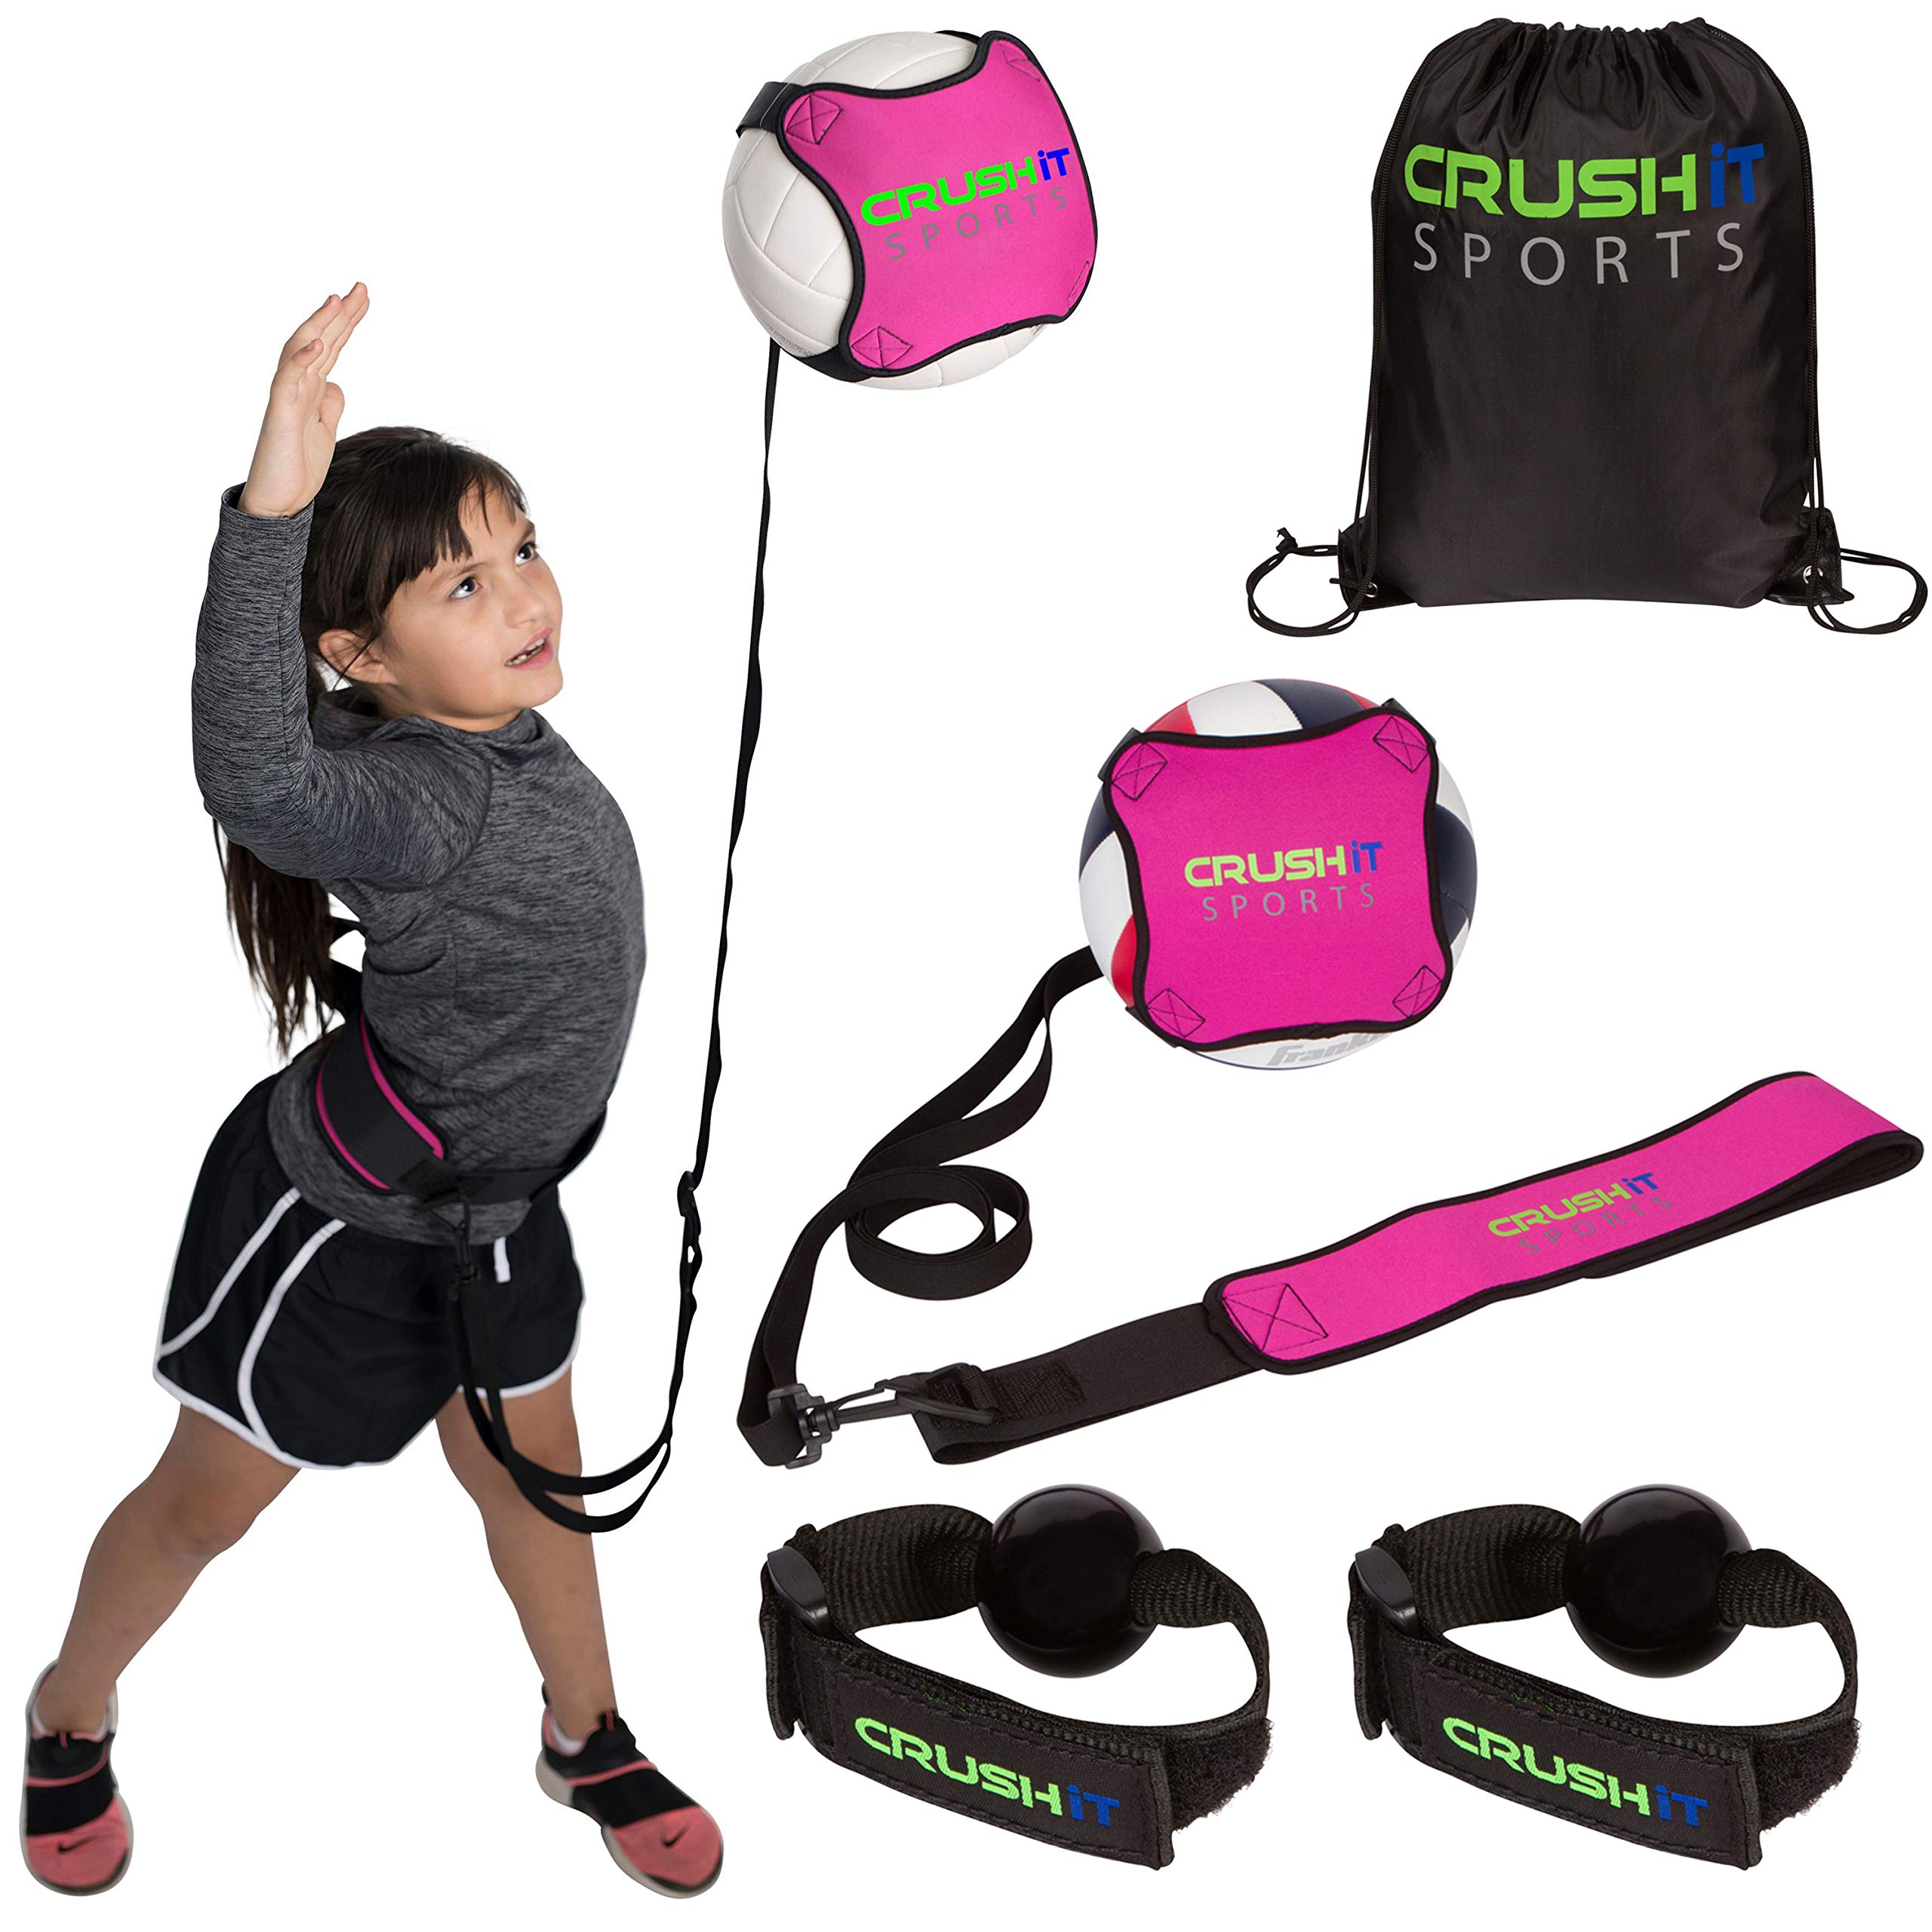 Crush It Sports Volleyball Training Aid (Pink)